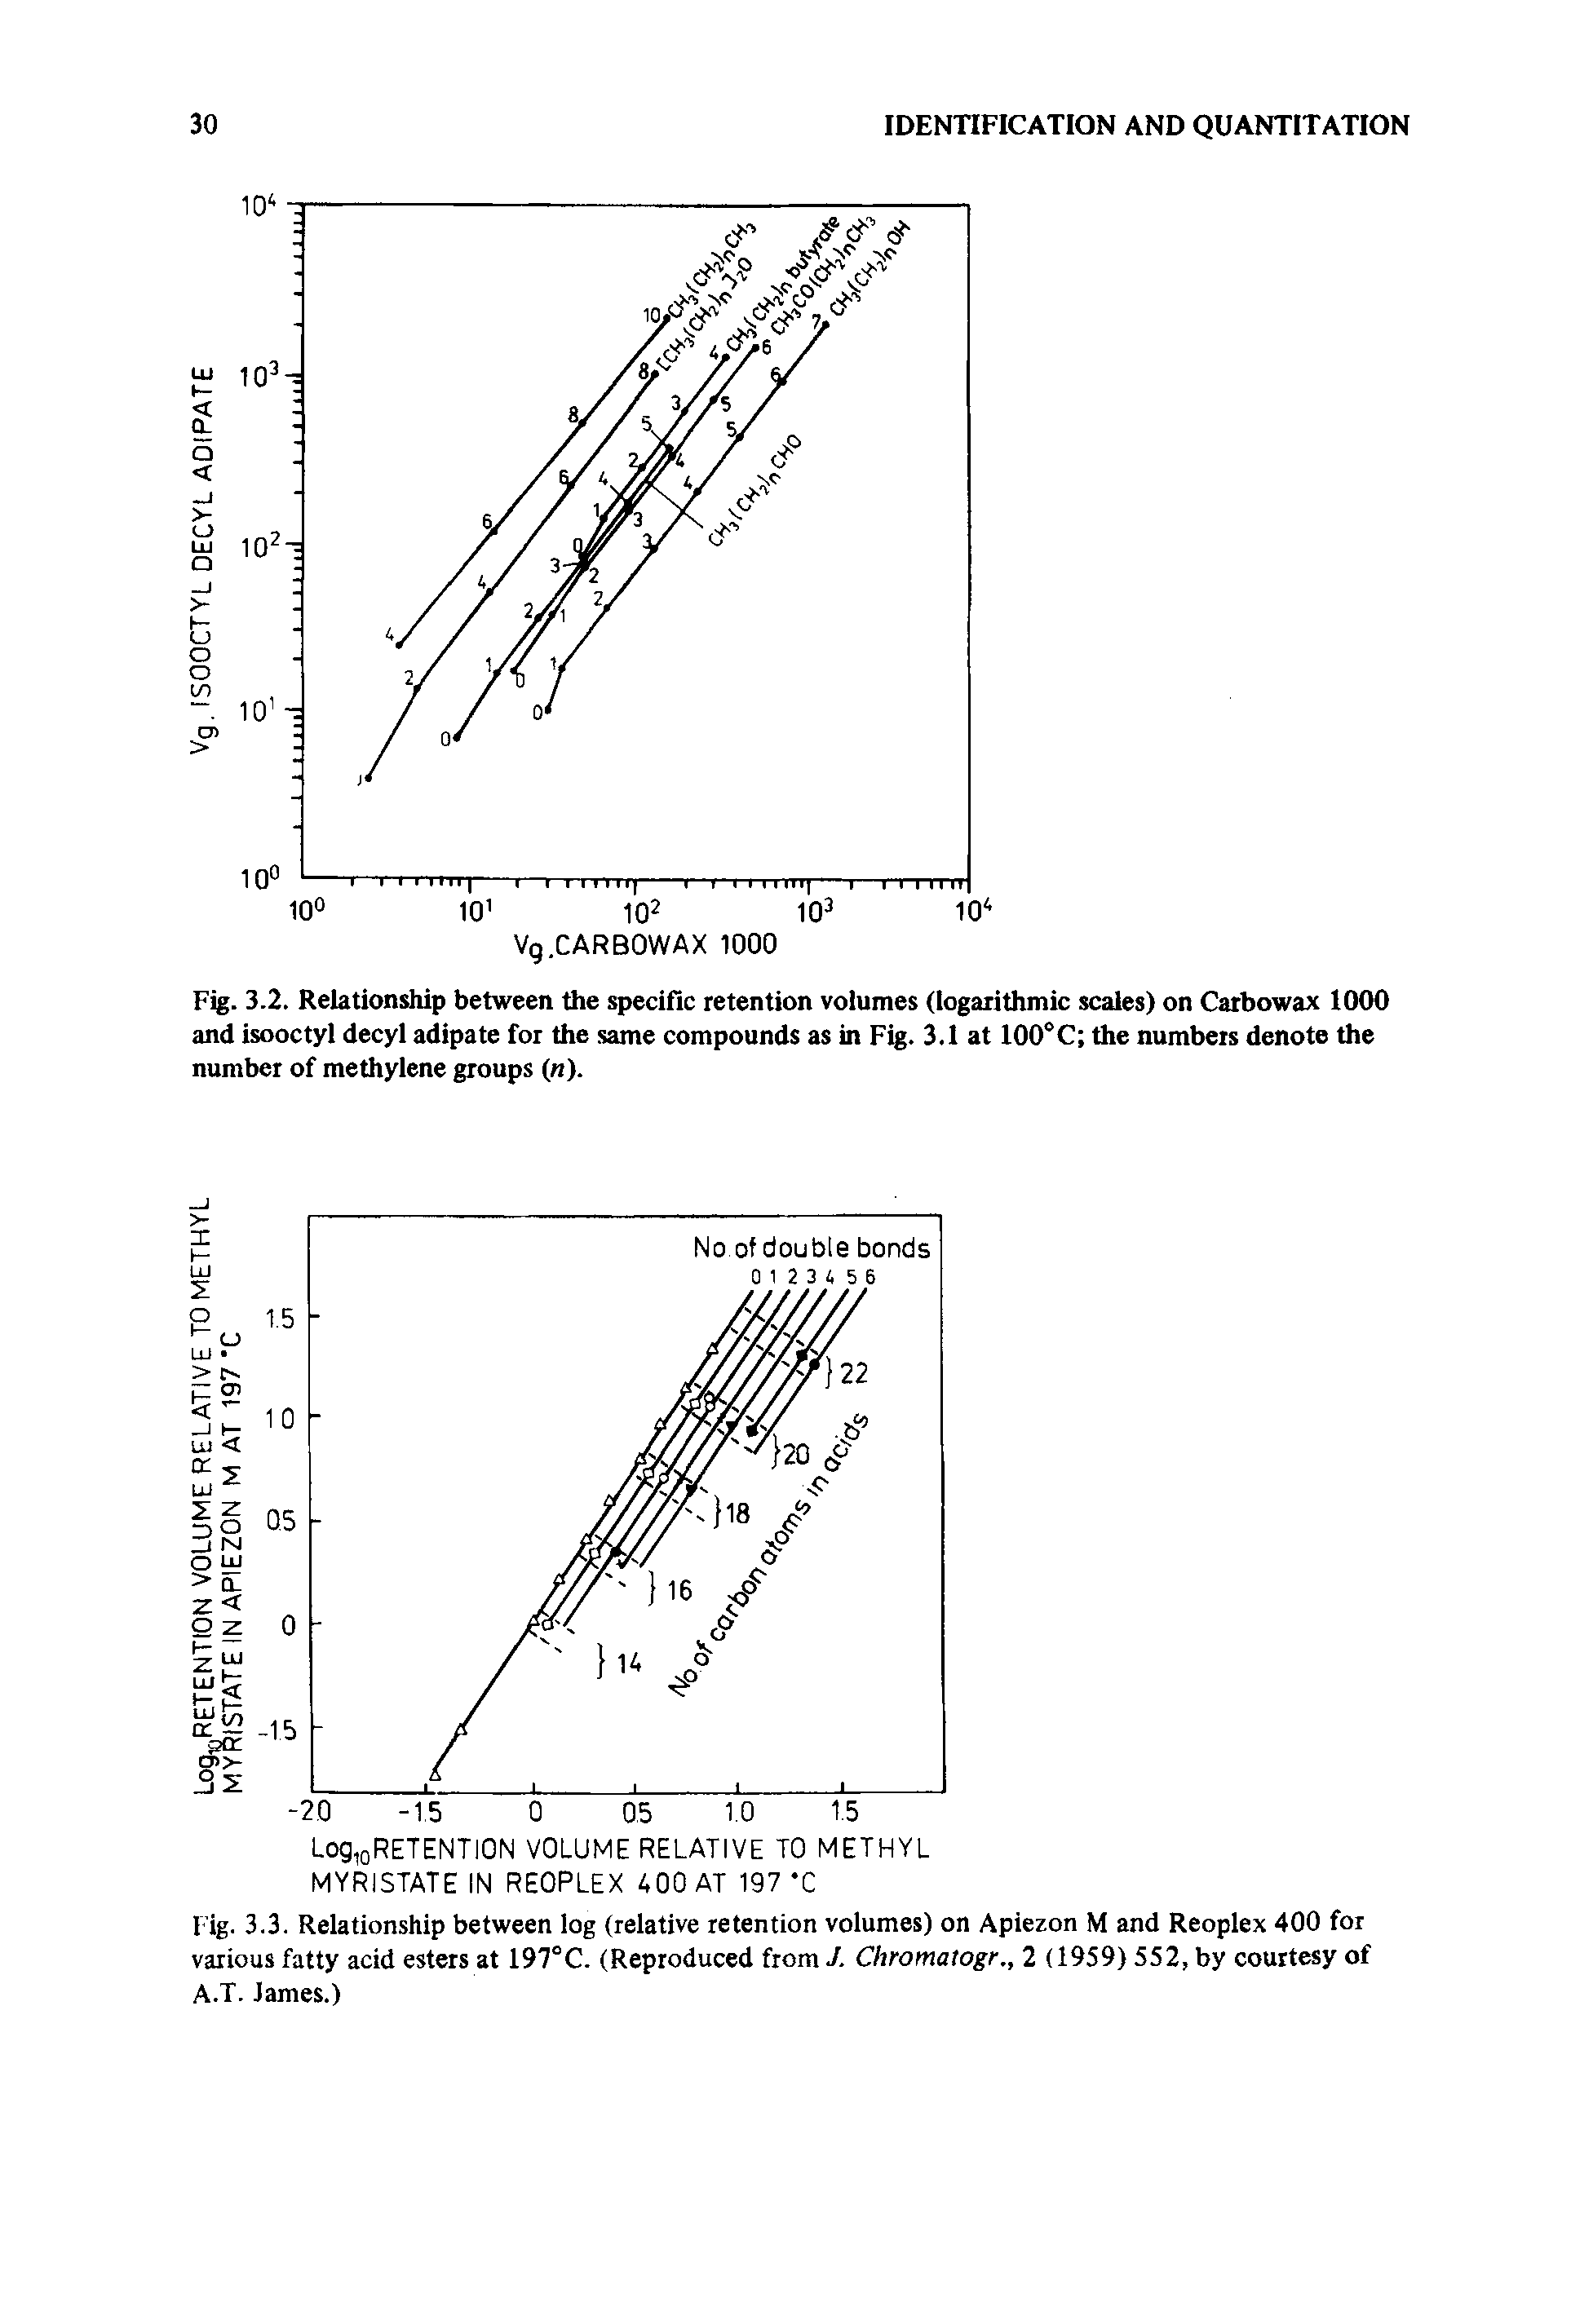 Fig. 3.2. Relationship between the specific retention volumes (logarithmic scales) on Carbowax 1000 and isooctyl decyl adipate for the same compounds as in Fig. 3.1 at 100°C the numbers denote the number of methylene groups ( ).